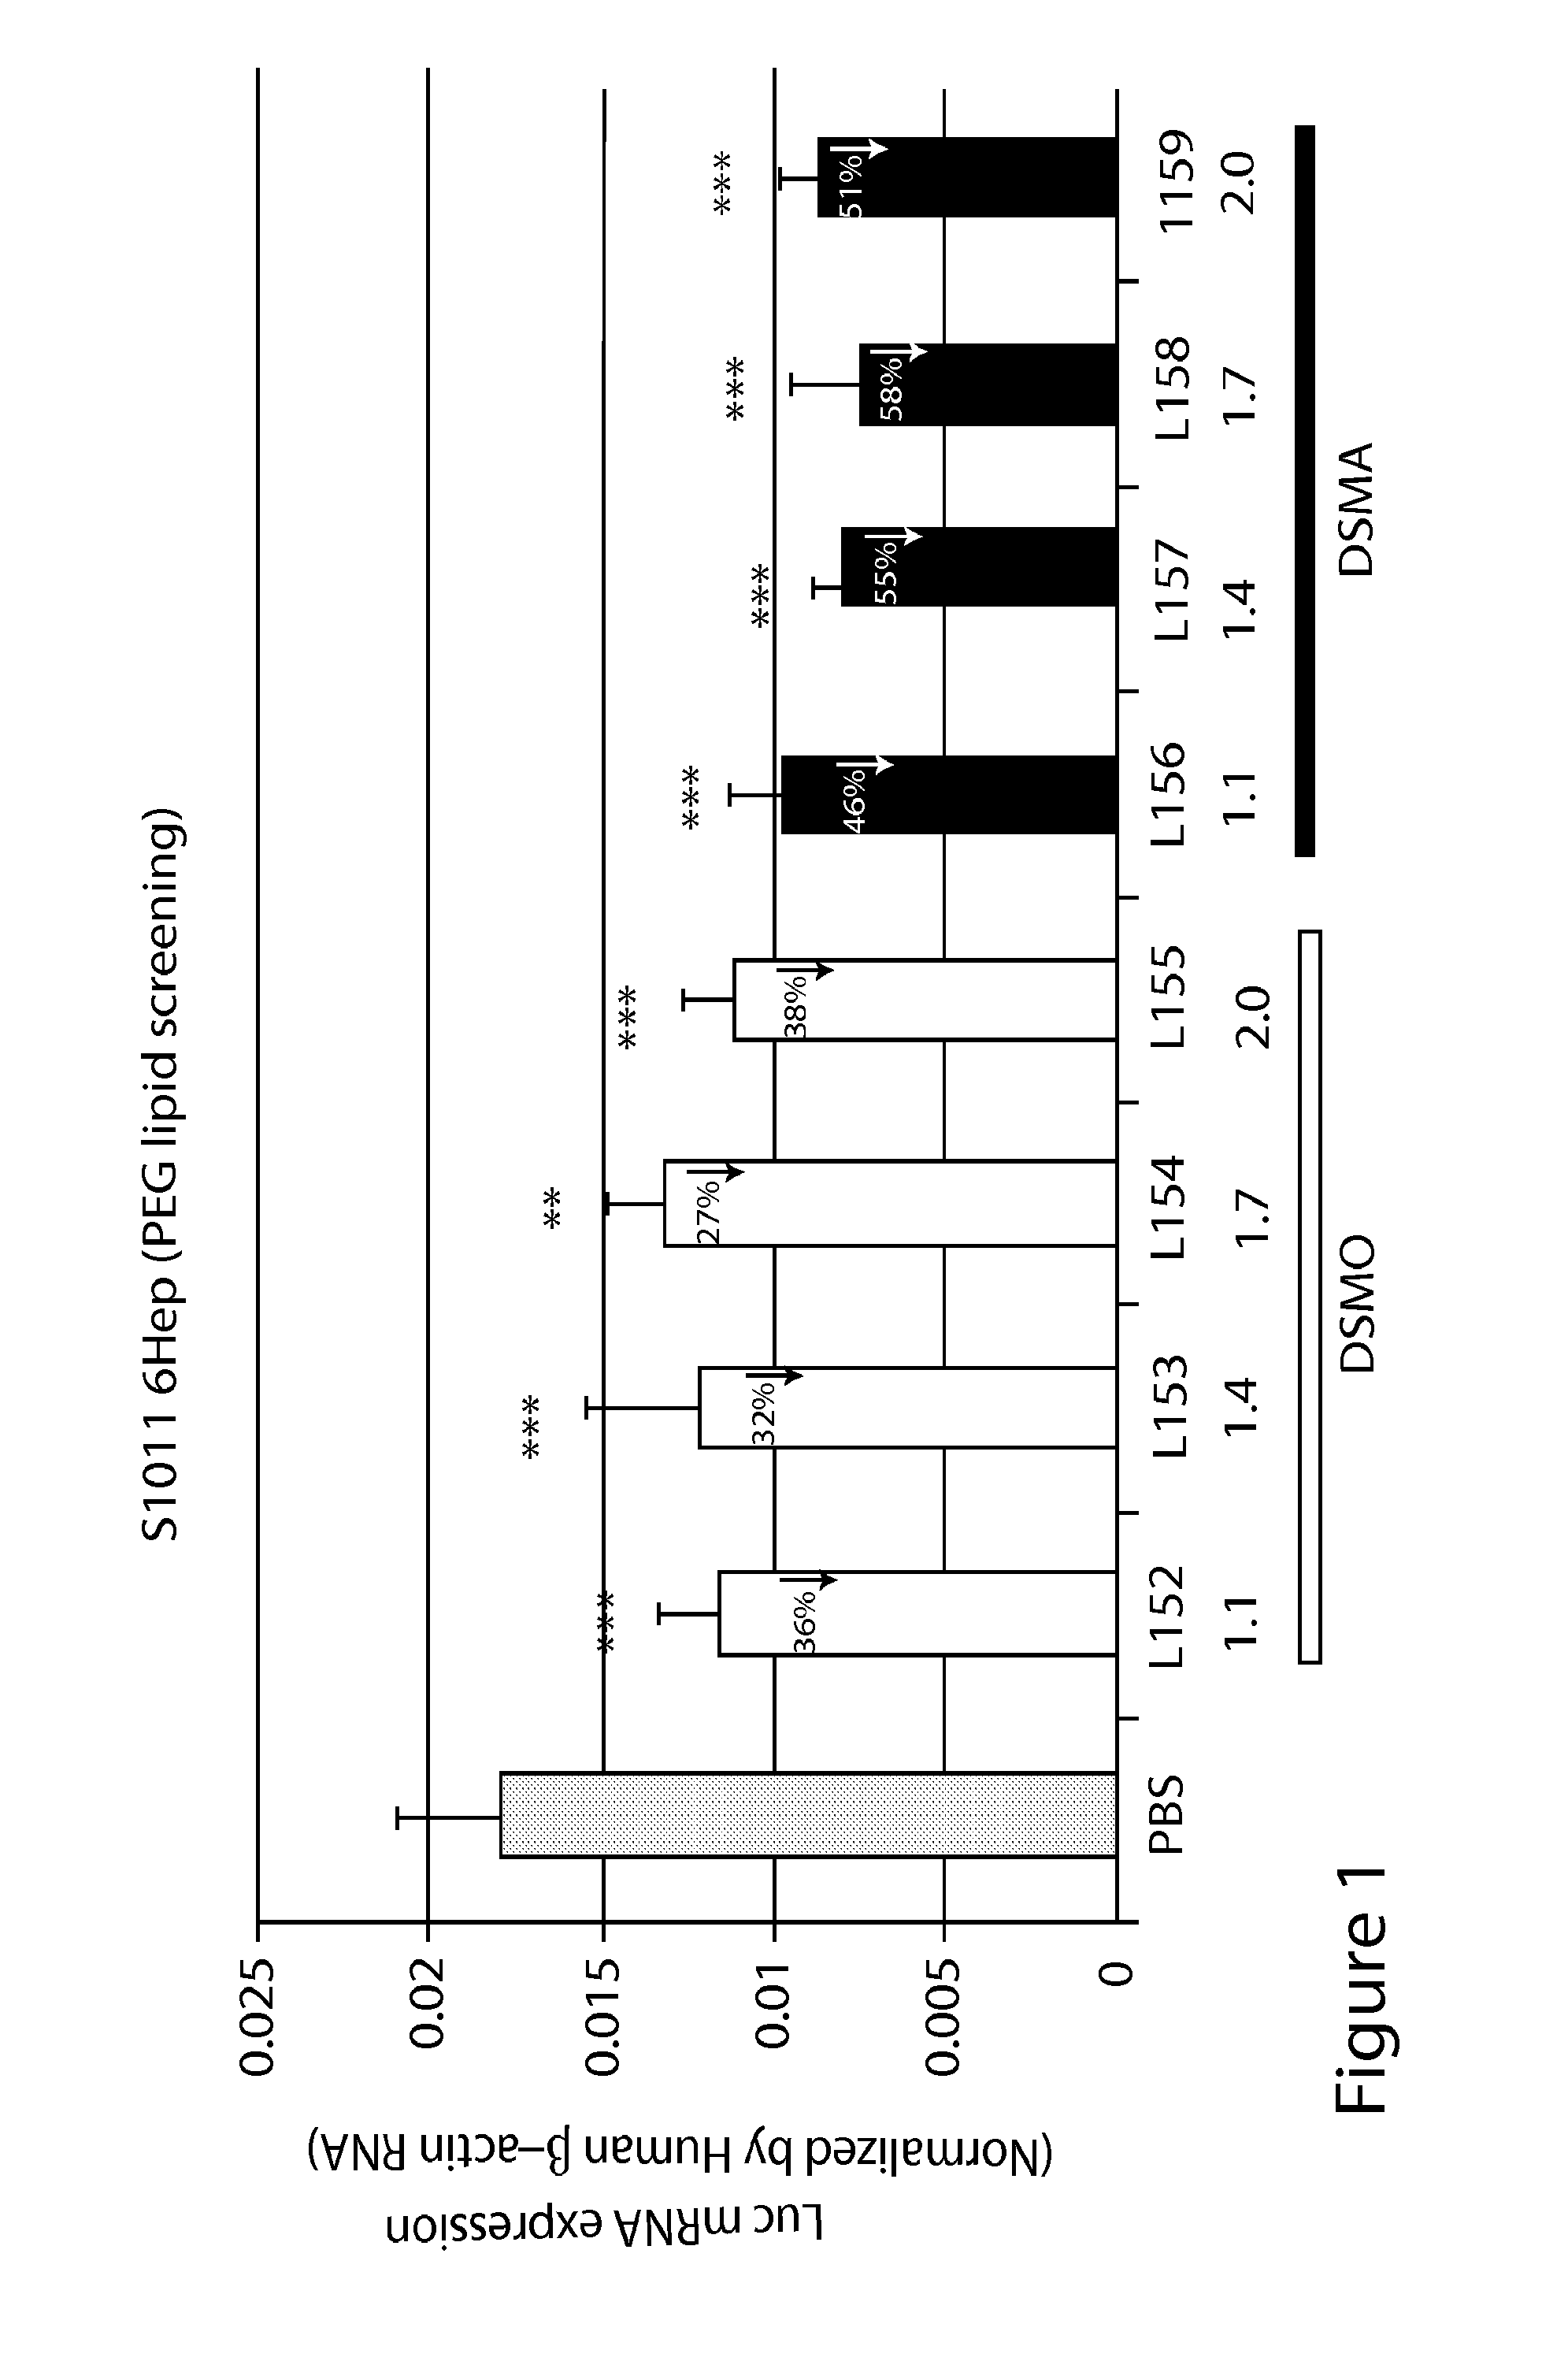 Di-aliphatic substituted pegylated lipids